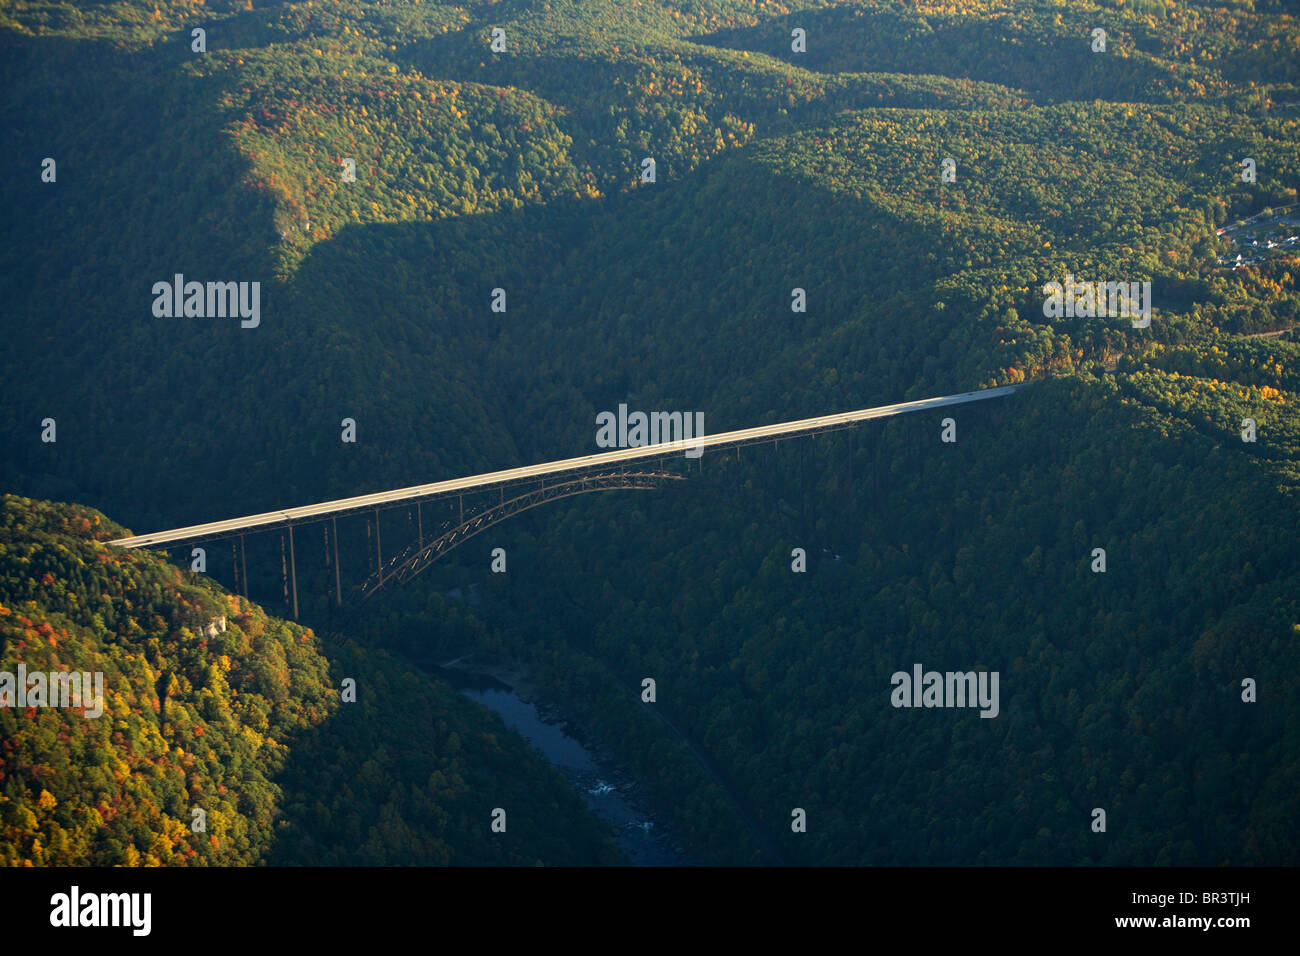 Aerial view of the Rt 19 bridge over the New River Gorge at sunset with fall colors near Fayetteville, WV Stock Photo